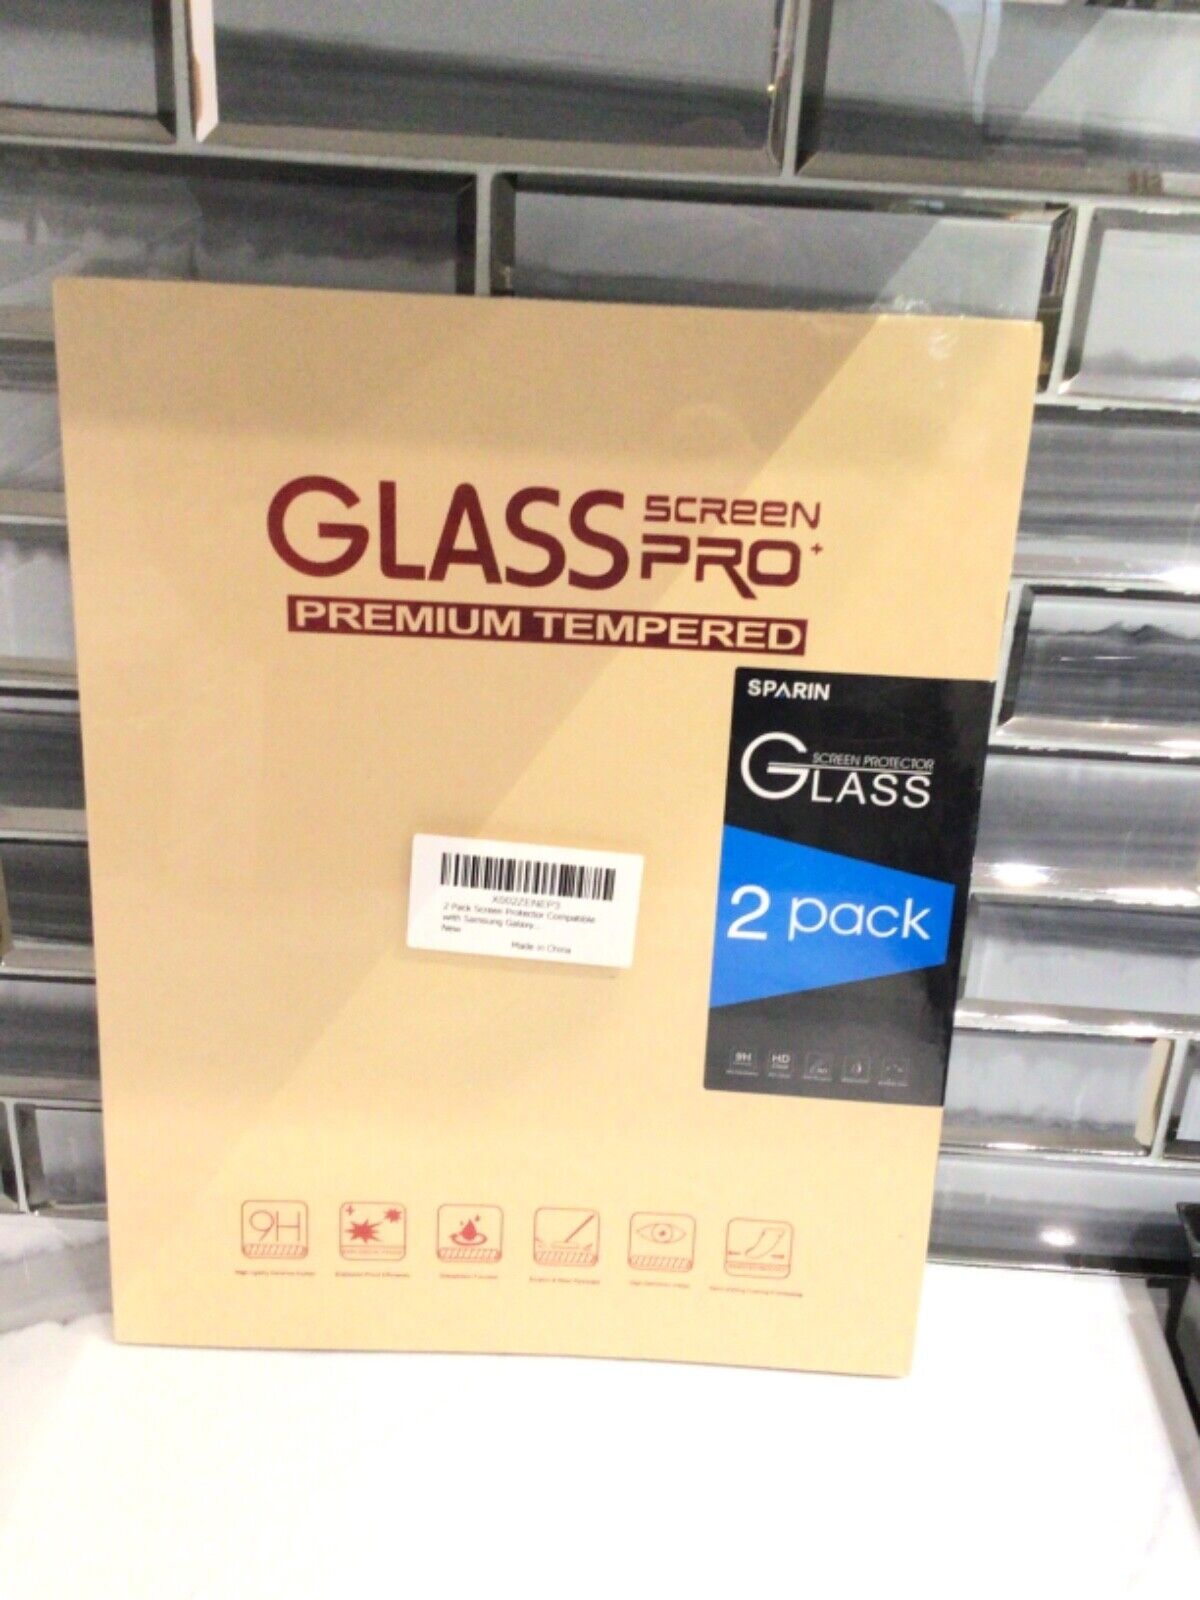 Sparin Glass Screen Protector Pro Premium Tempered 2 Pack Samsung Galaxy Tablet